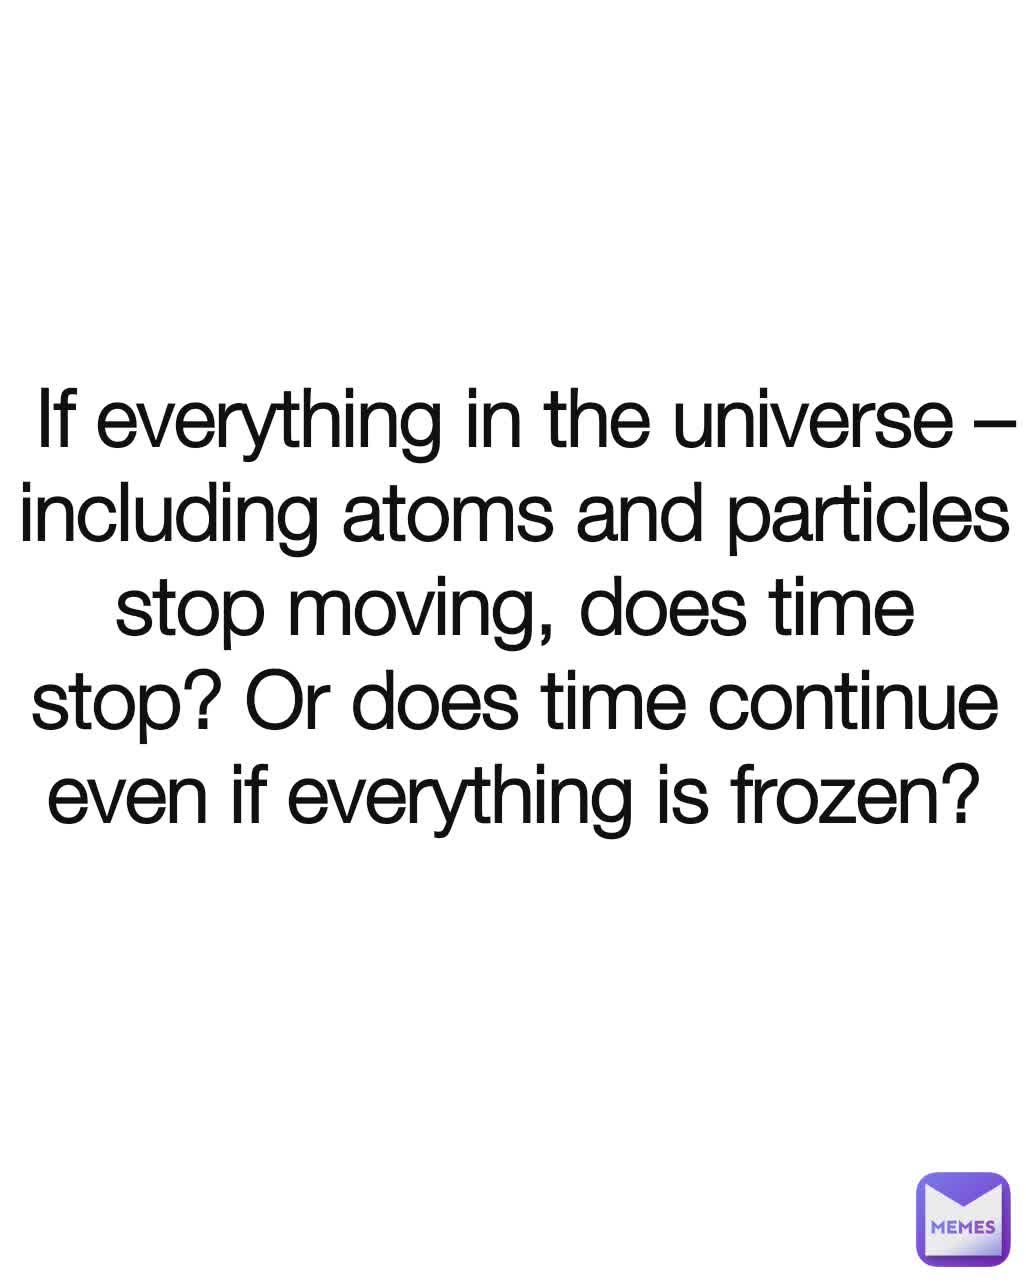  If everything in the universe – including atoms and particles stop moving, does time stop? Or does time continue even if everything is frozen?


